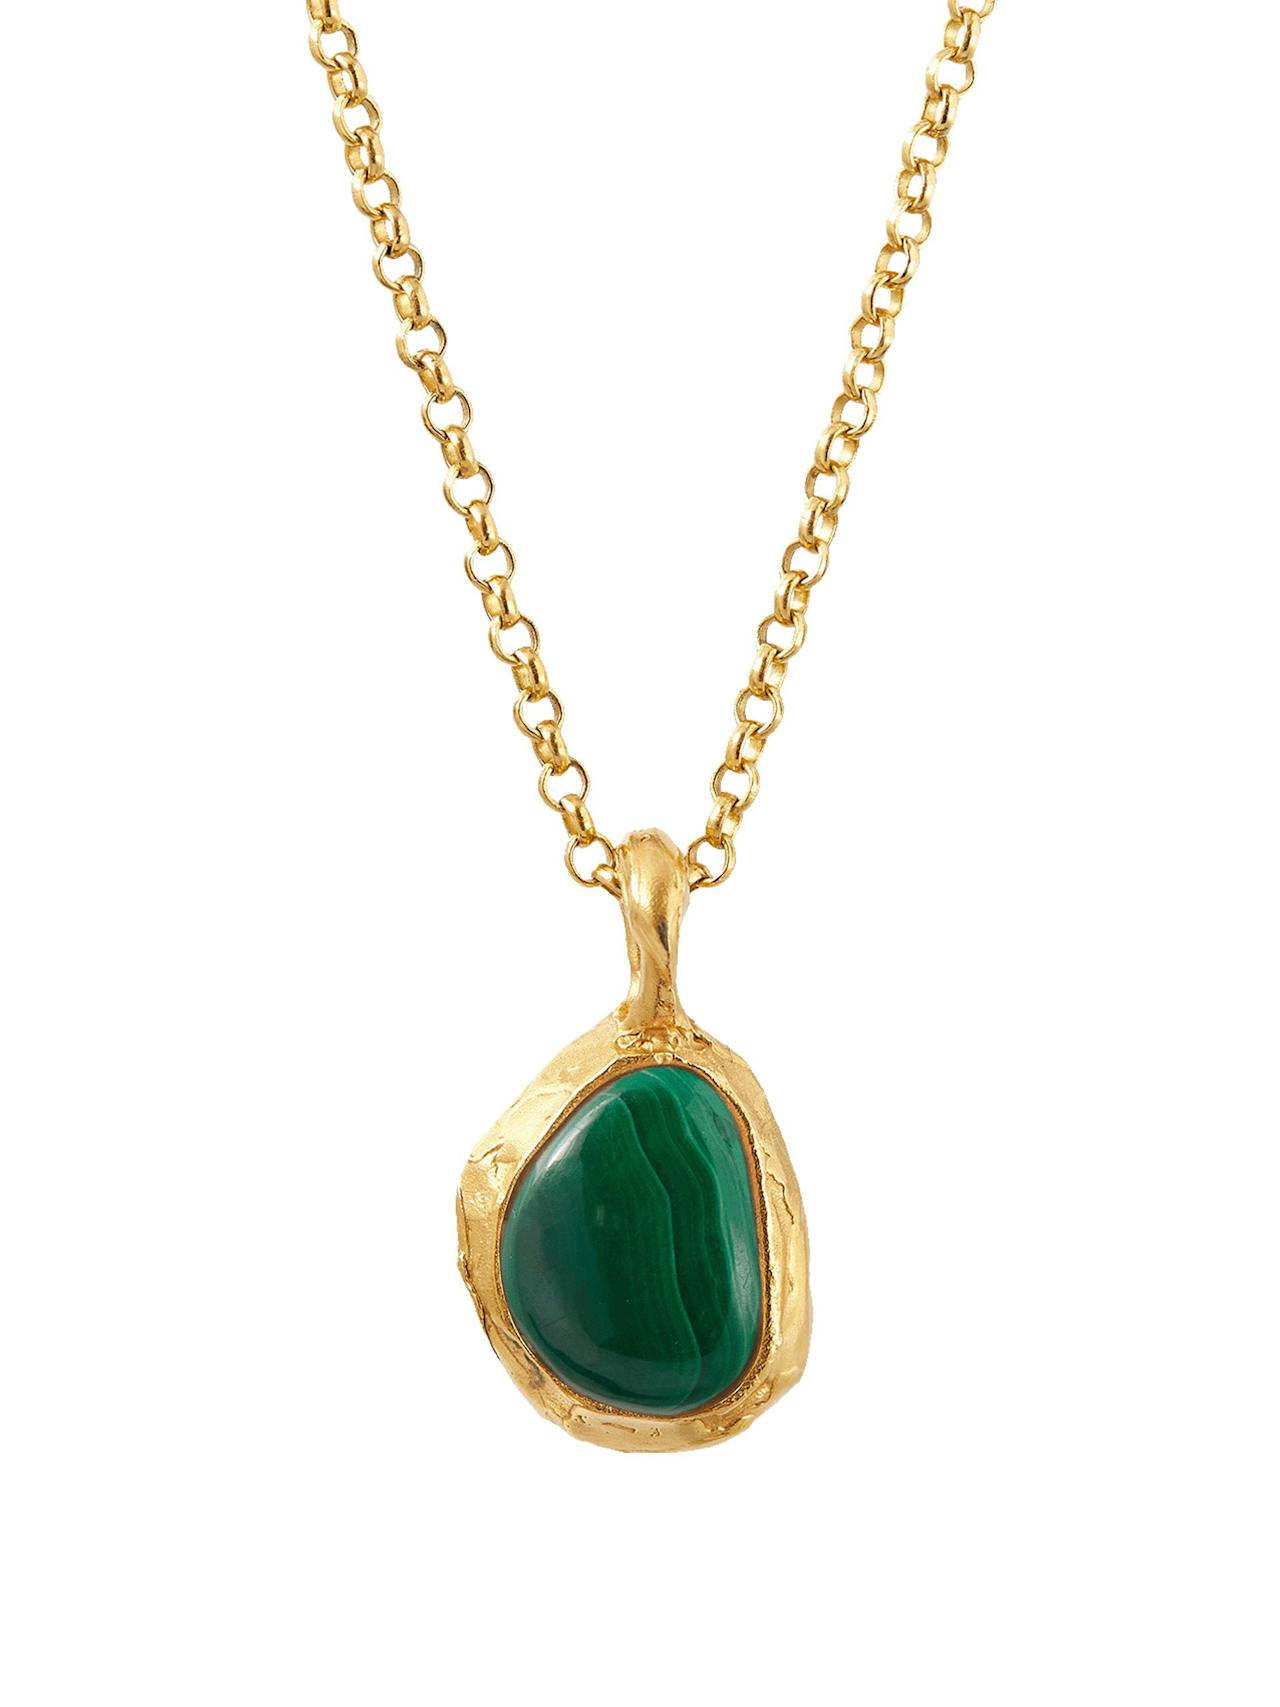 The Droplet of the Mountain Malachite necklace